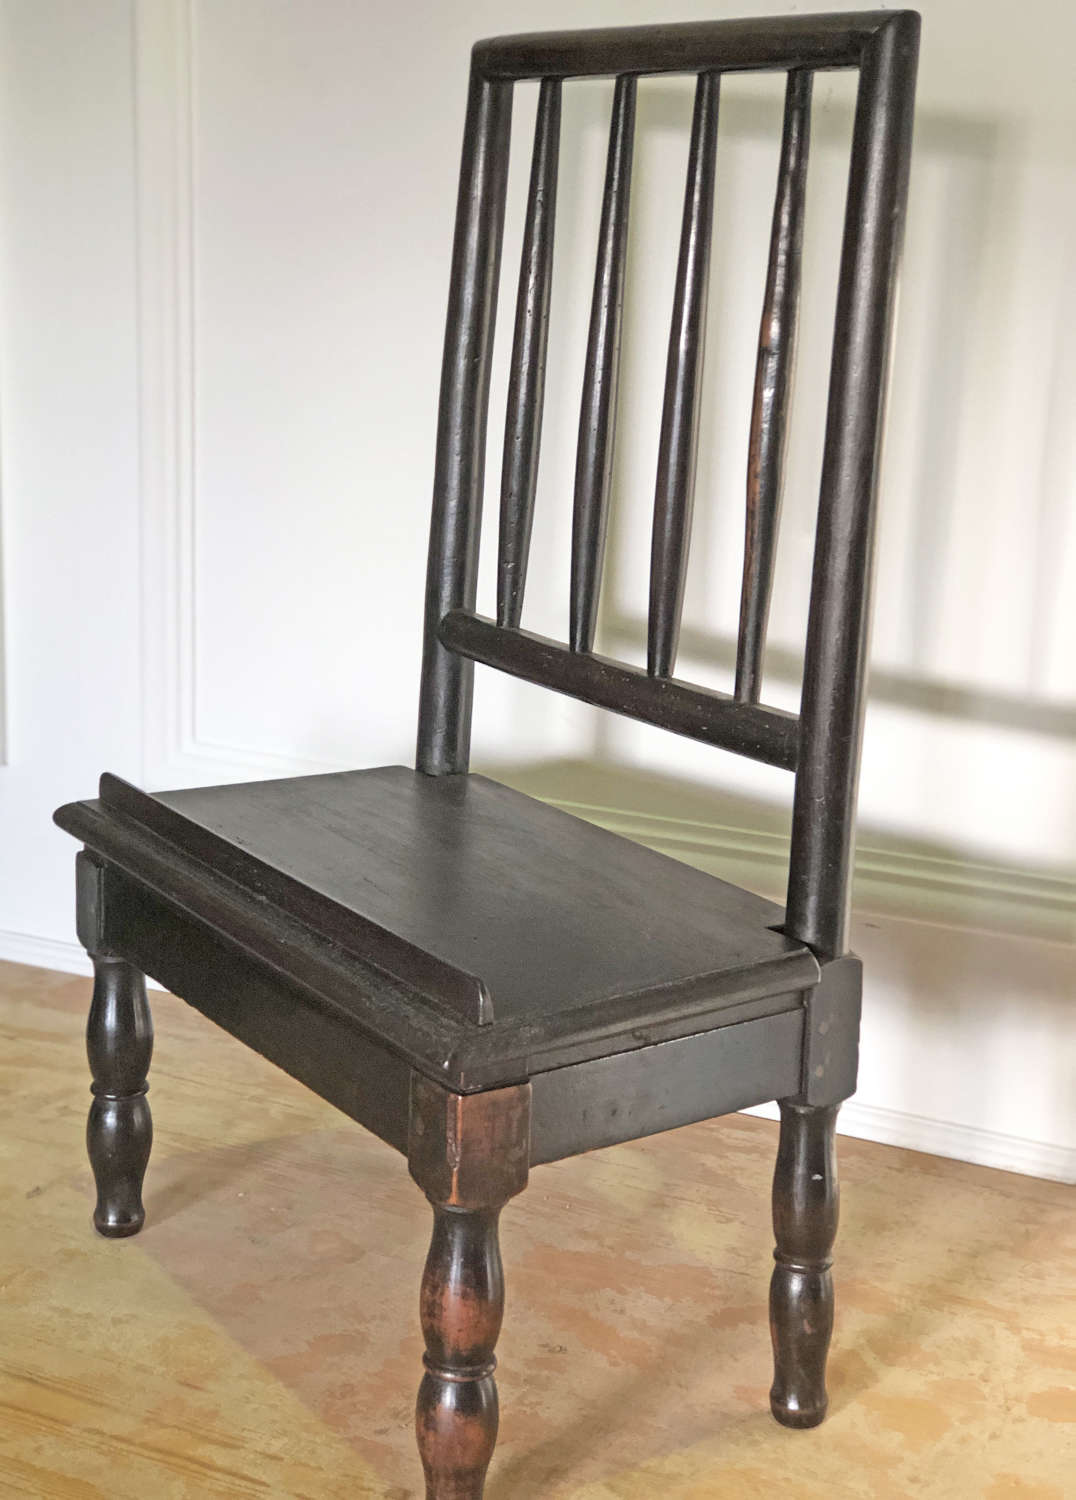 19th C French Artists' Chair - 1880